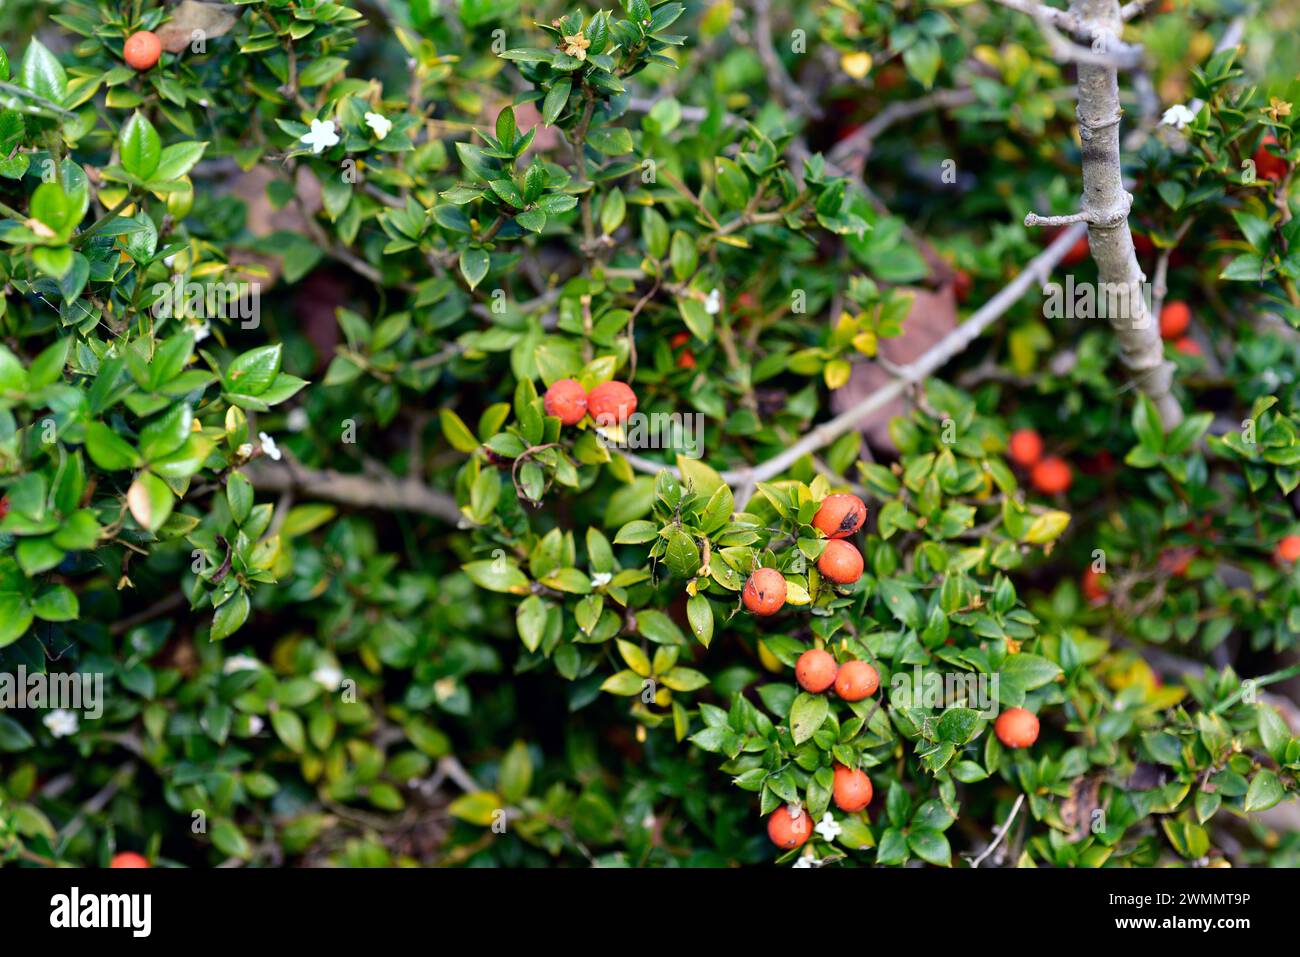 Chain fruit (Alyxia ruscifolia) is a shrub native to Australia. Flowers, fruits and leaves detail. Stock Photo